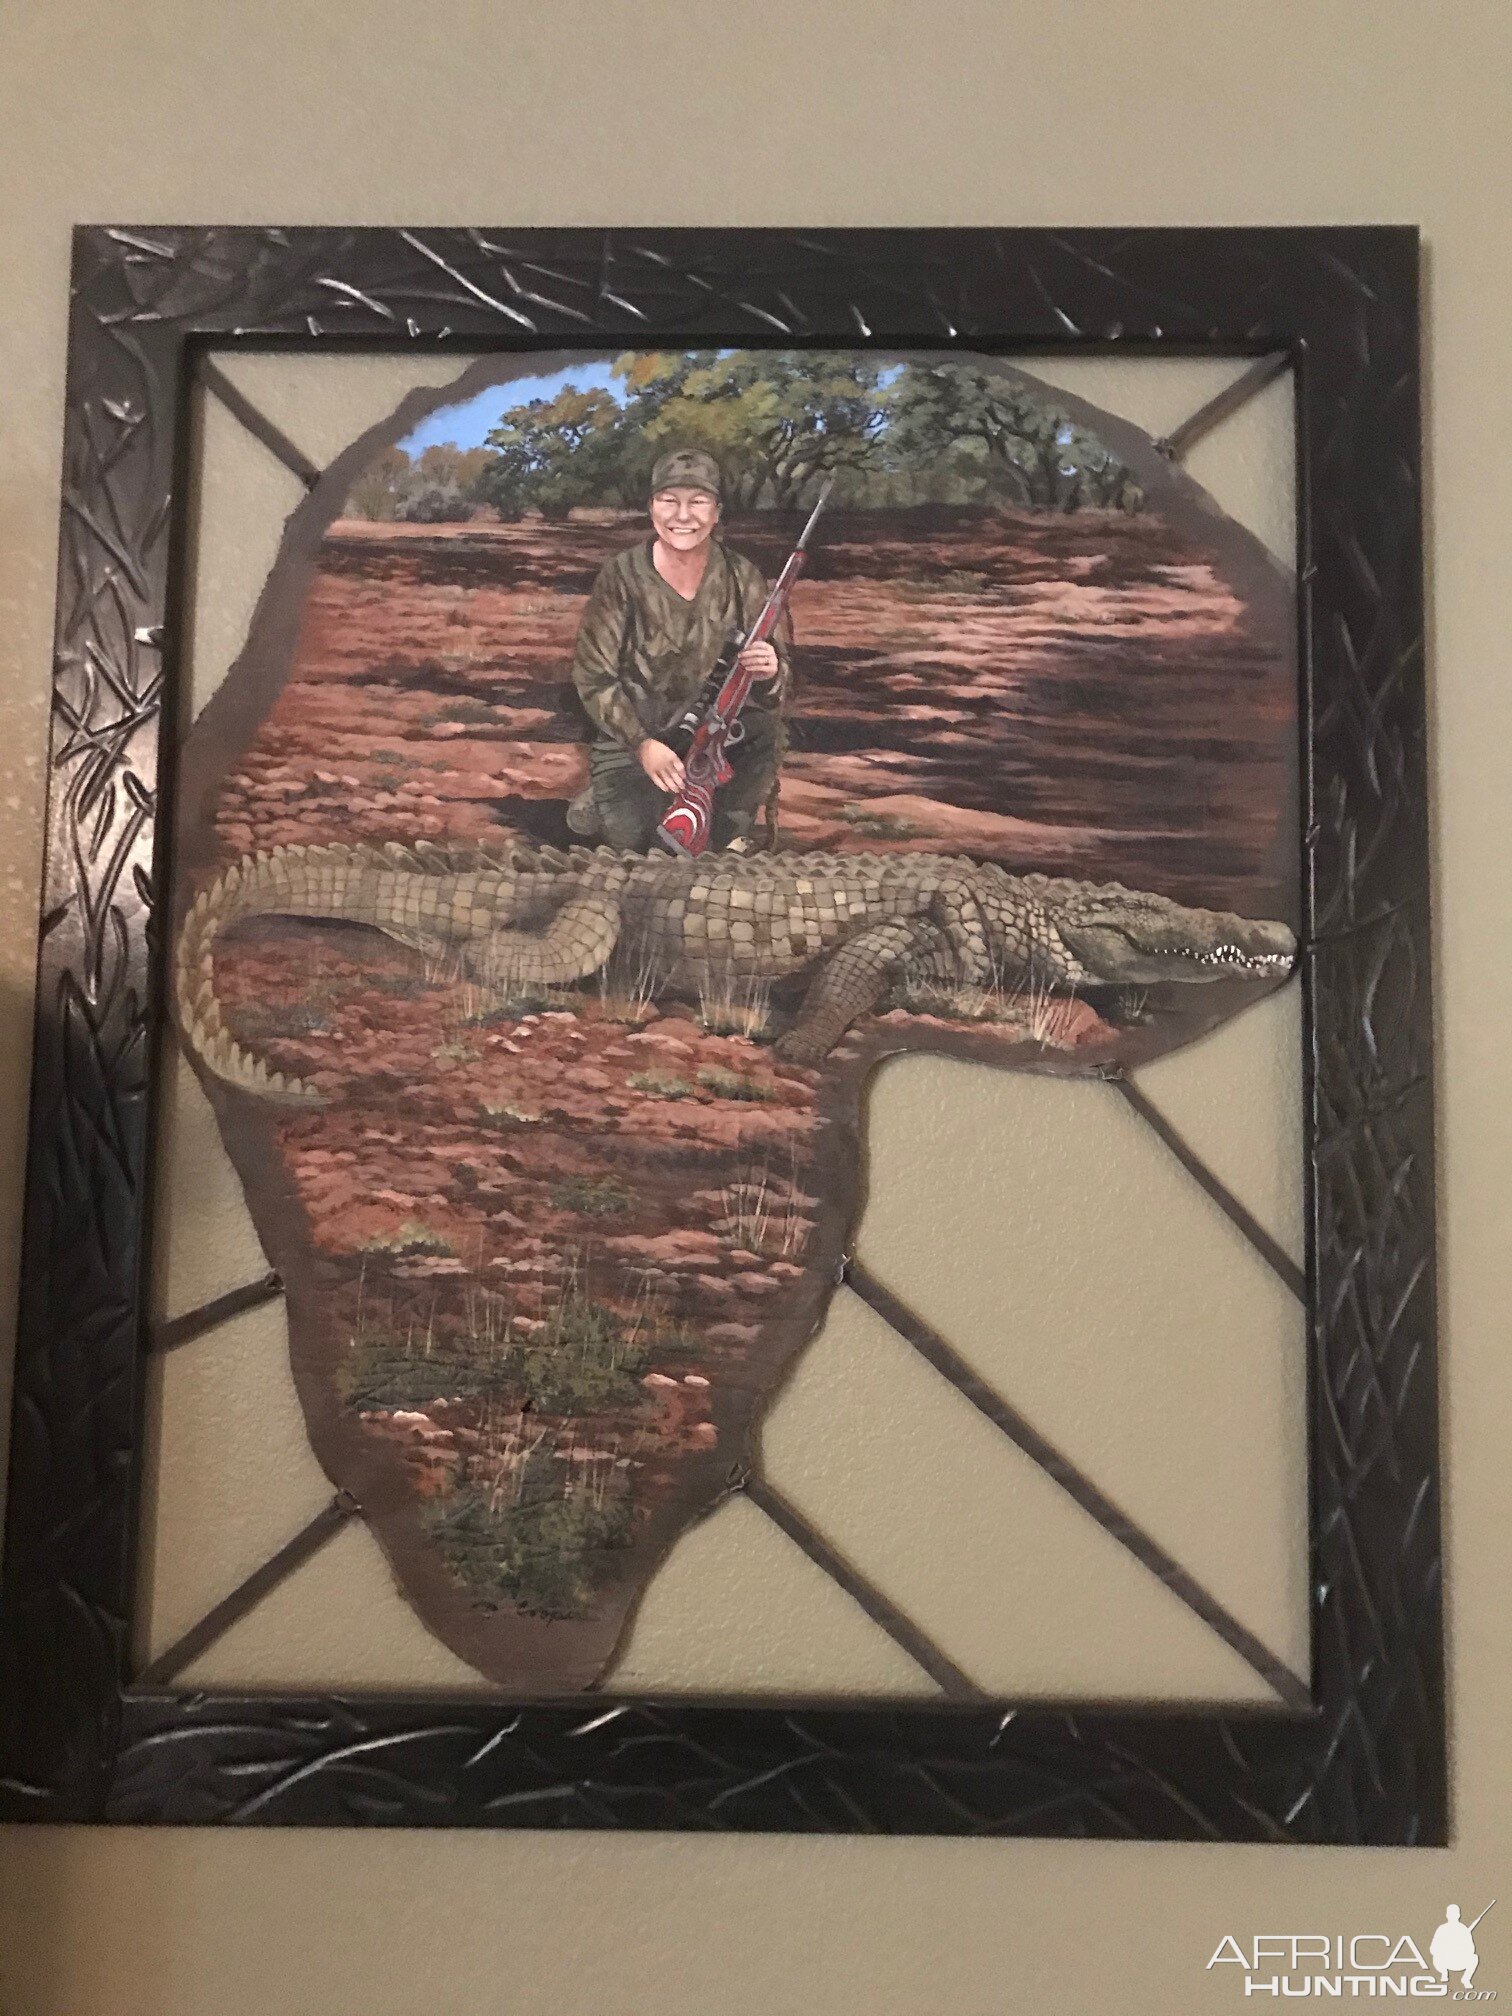 Framed Leather Craft Painting